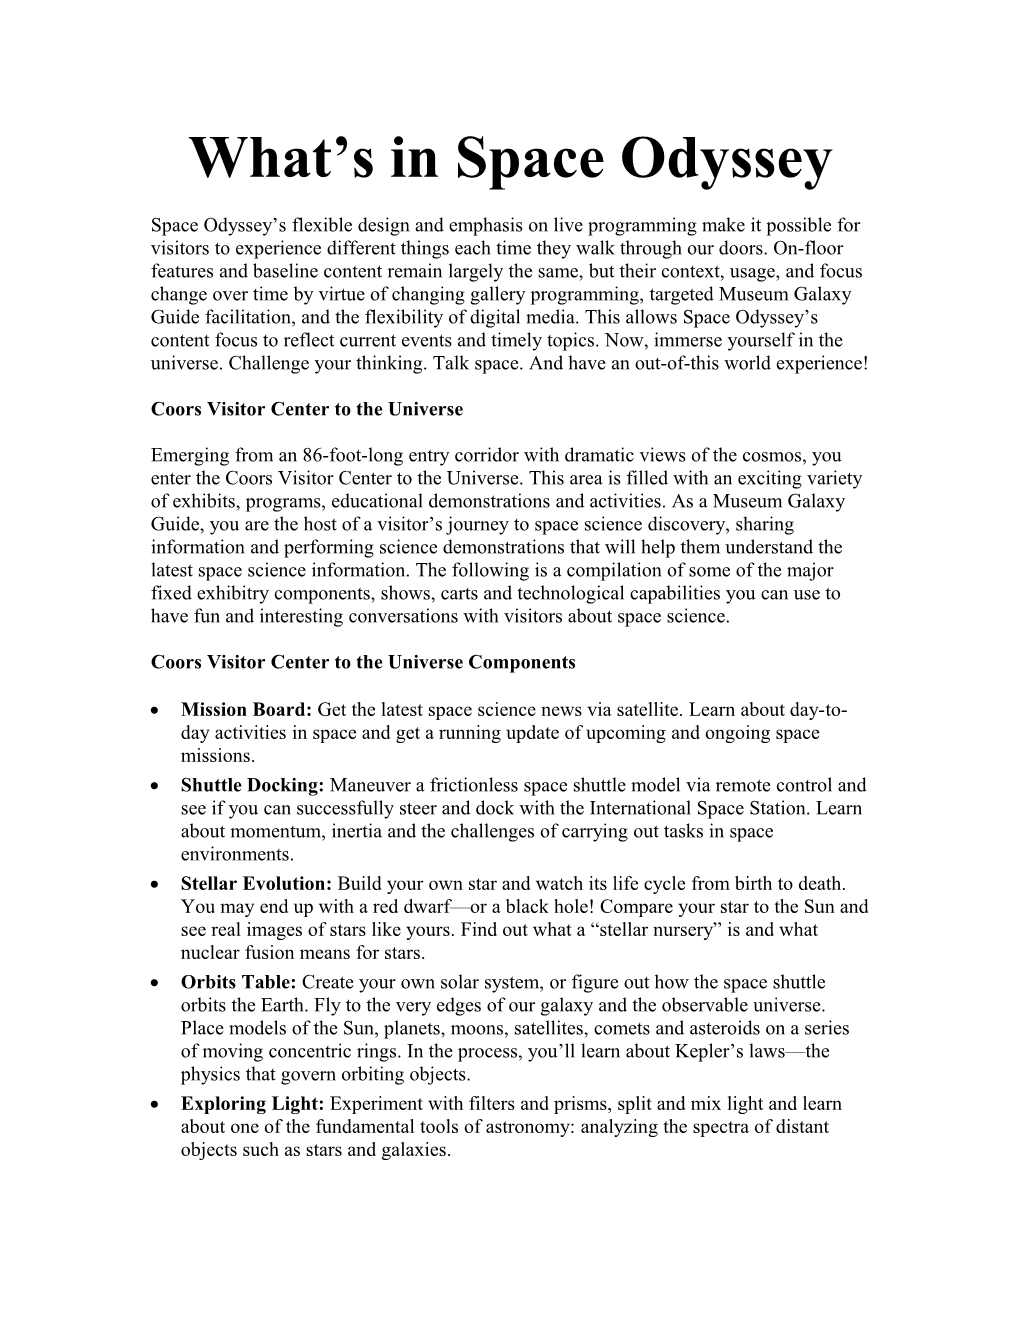 Space Odyssey Main Press Release